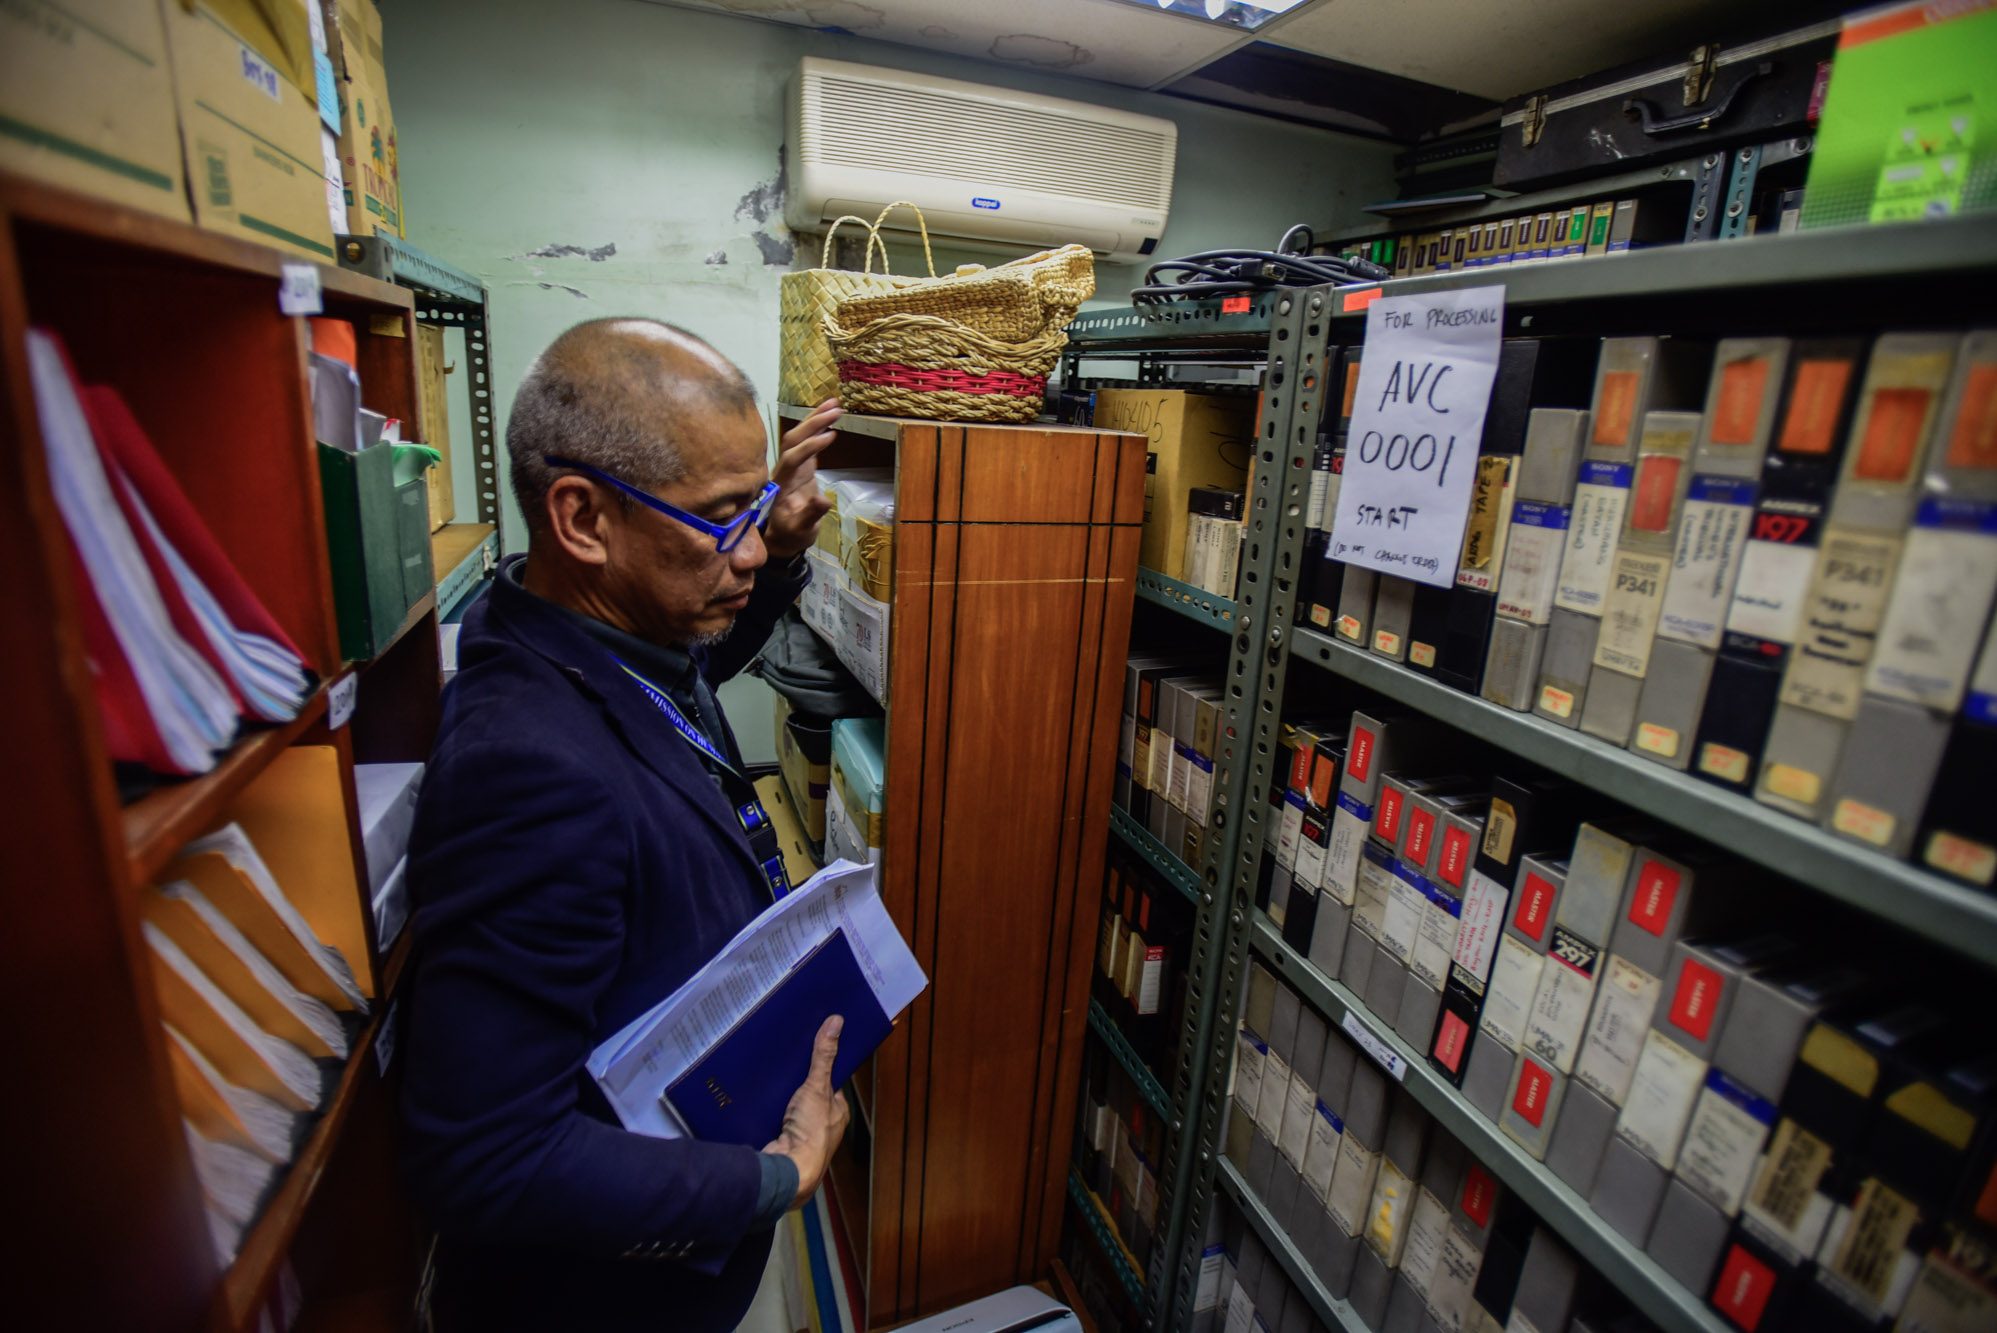 PRECAUTION. Members of the Commission on Human Rights conduct an ocular inspection at the IBON Foundation's office in Quezon City on November 8, 2019. File photo by Maria Tan/Rappler